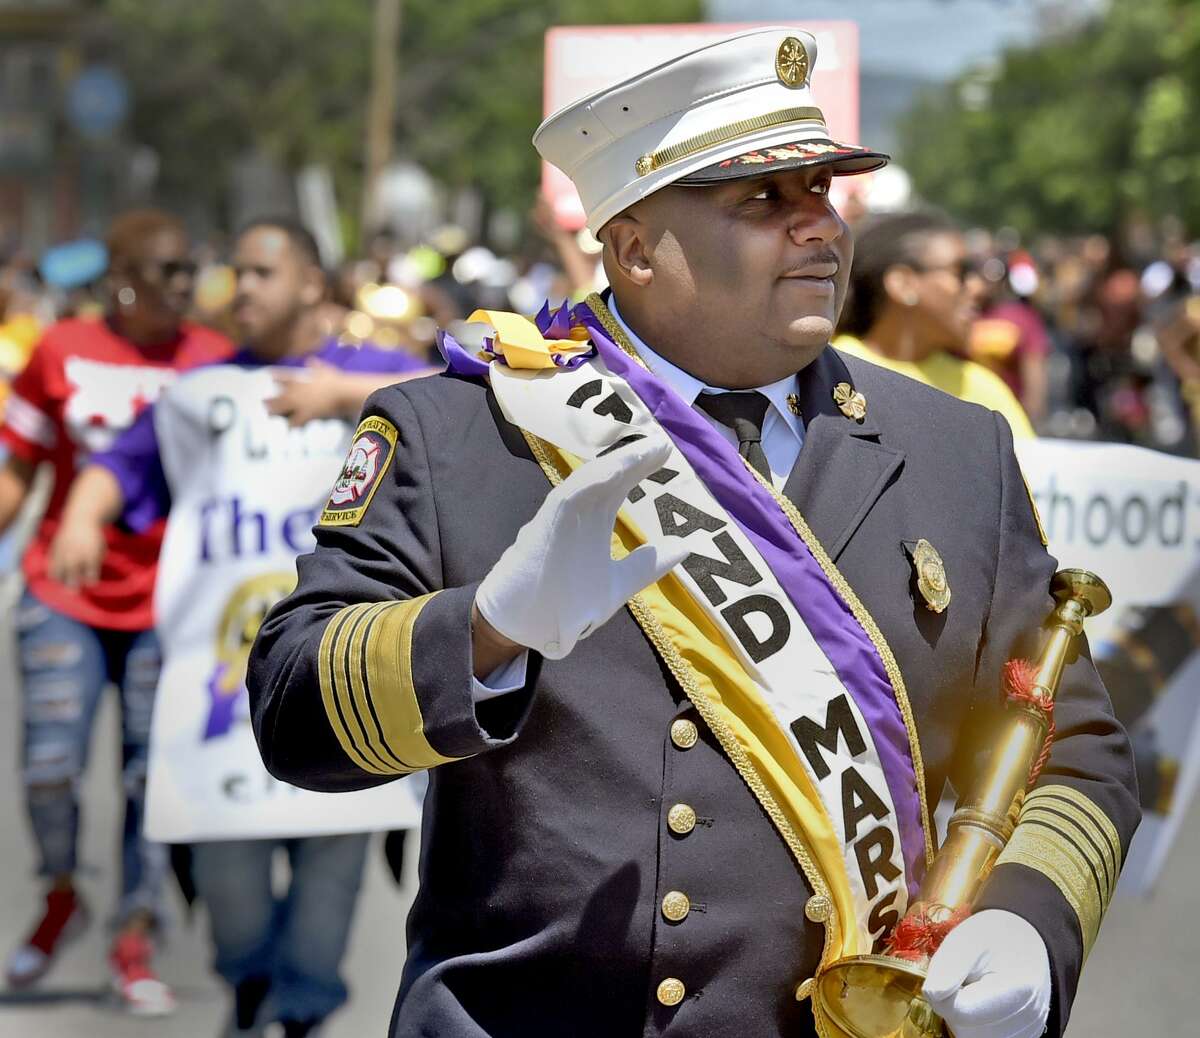 New Haven, Connecticut - June 3, 2018: New Haven Fire Chief John Alston marches as the Grand Marshall in The Freddie Fixer parade Sunday afternoon on Dixwell Ave. in New Haven.